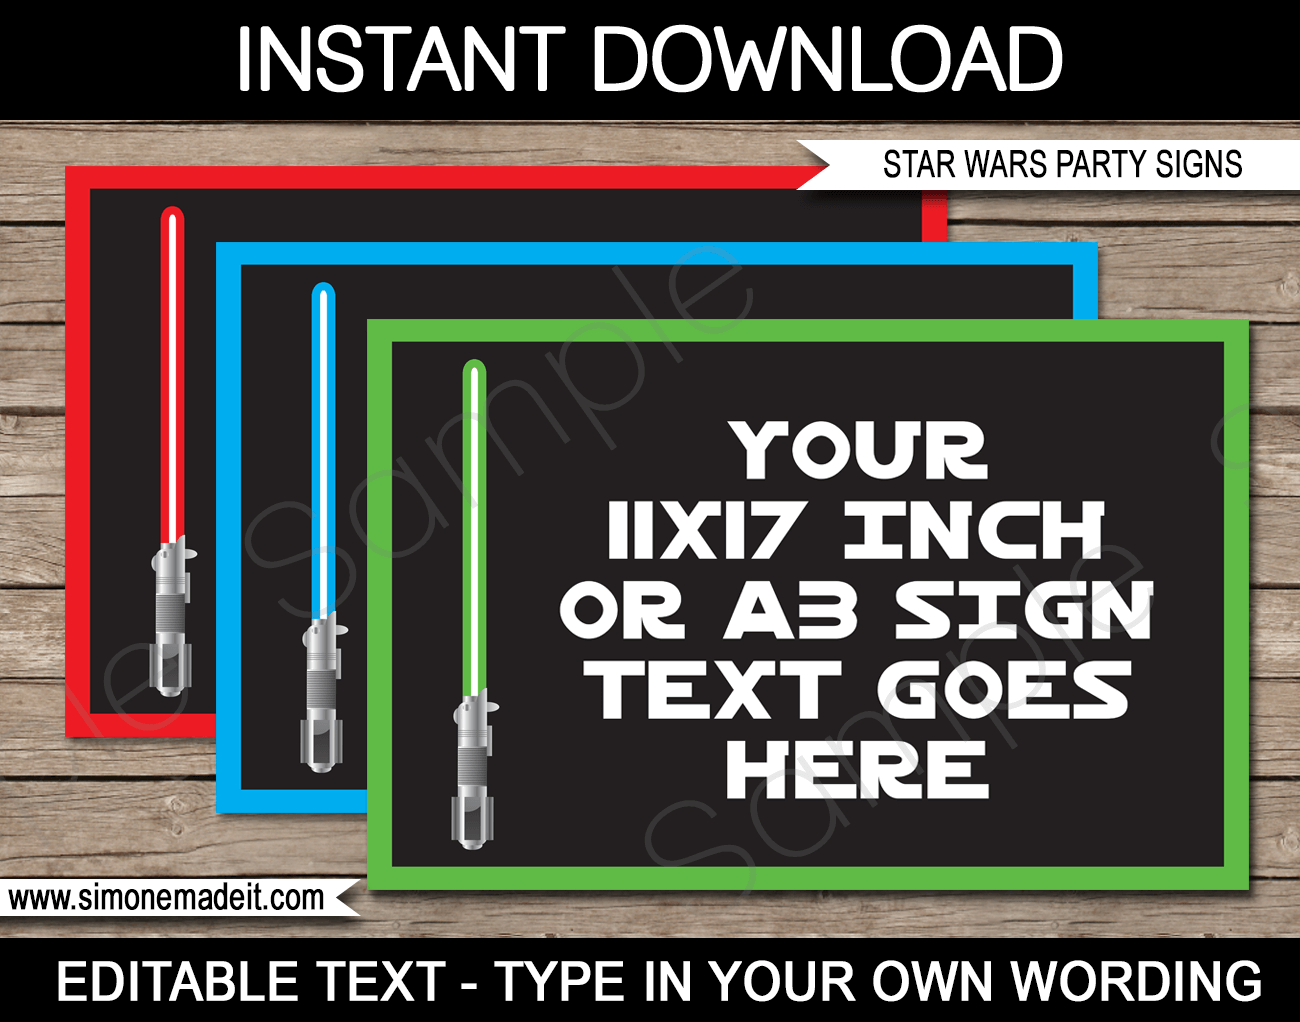 Printable Star Wars Party Signs Templates | Birthday Party Decorations with Editable Text | $4.00 Instant Download via SIMONEmadeit.com